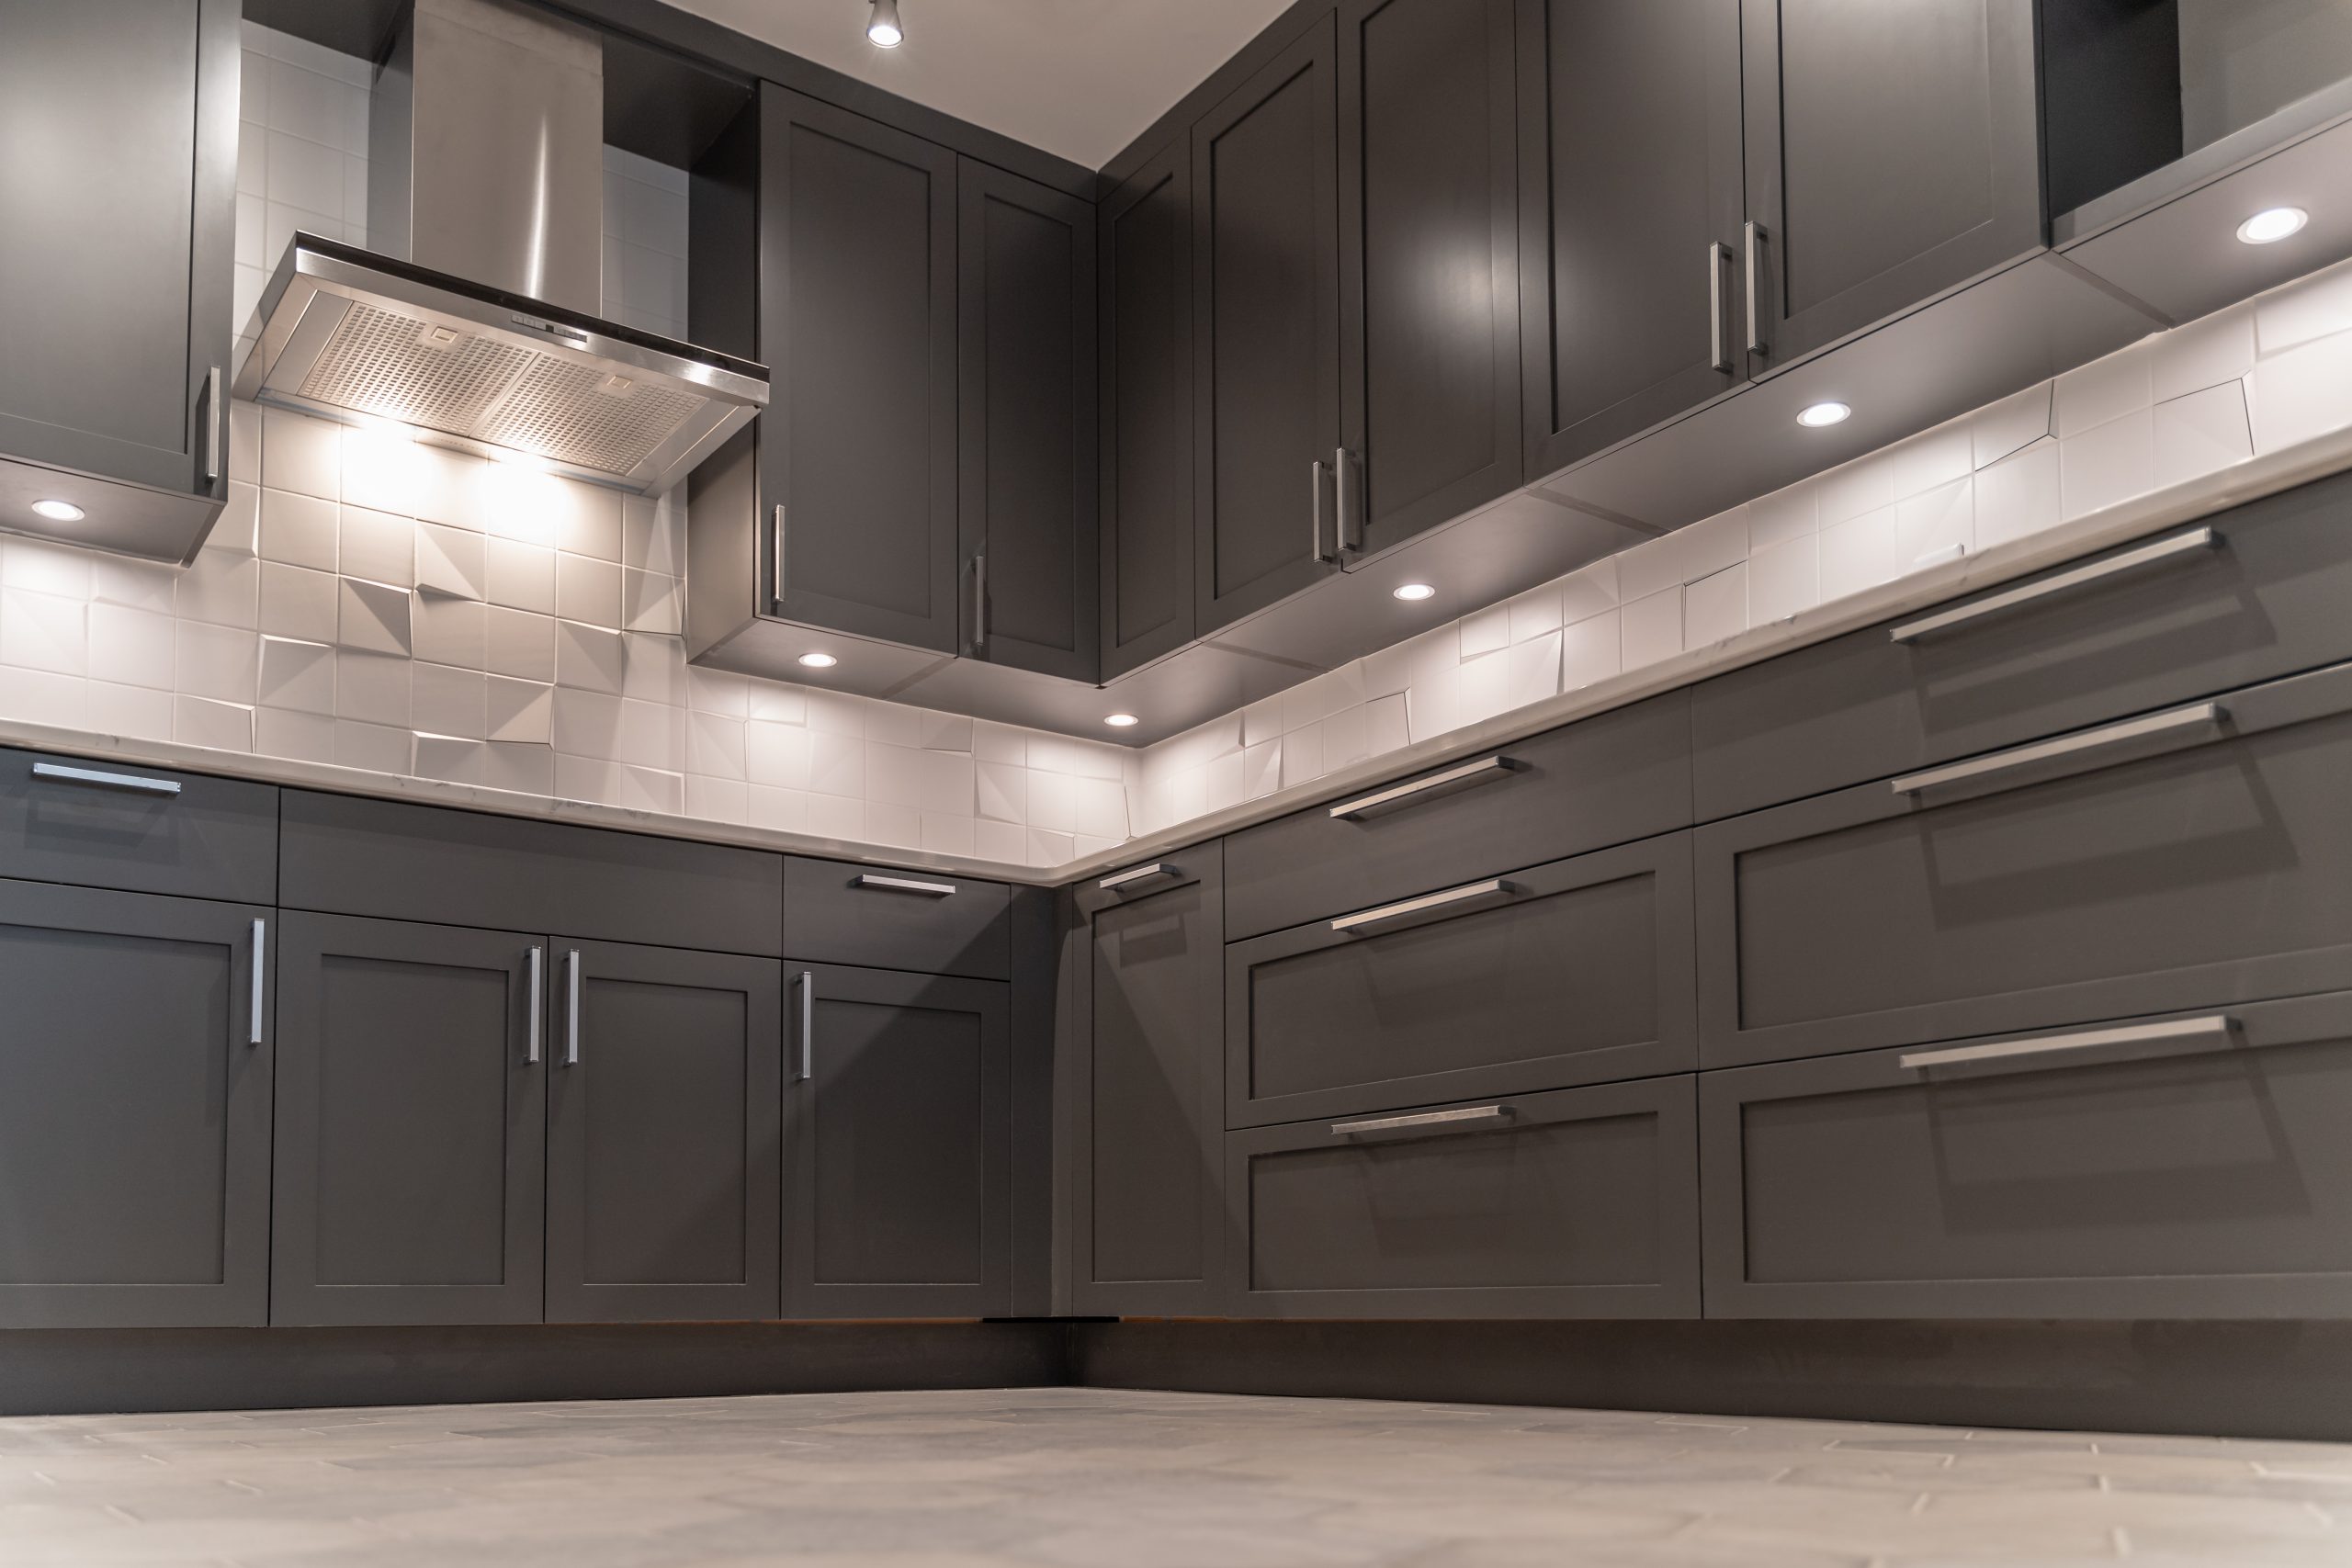 Modern kitchen with dark cabinets and unique backsplash featuring projecting tile corners